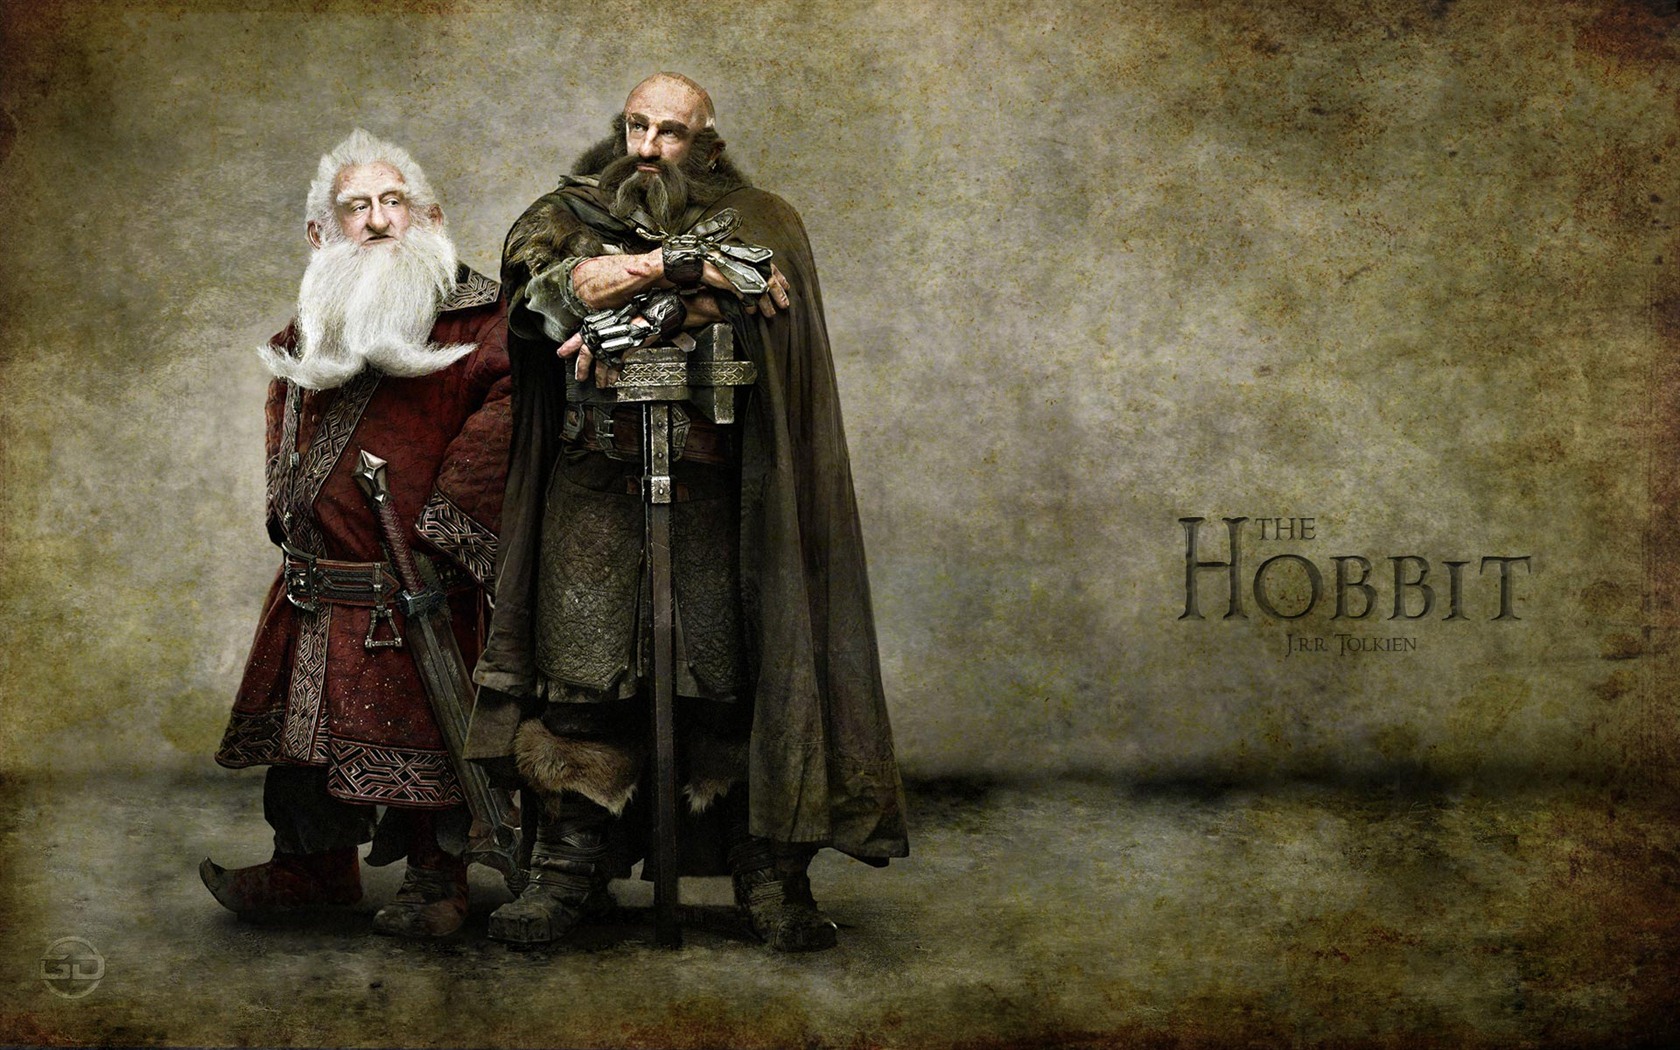 The Hobbit: An Unexpected Journey HD wallpapers #4 - 1680x1050